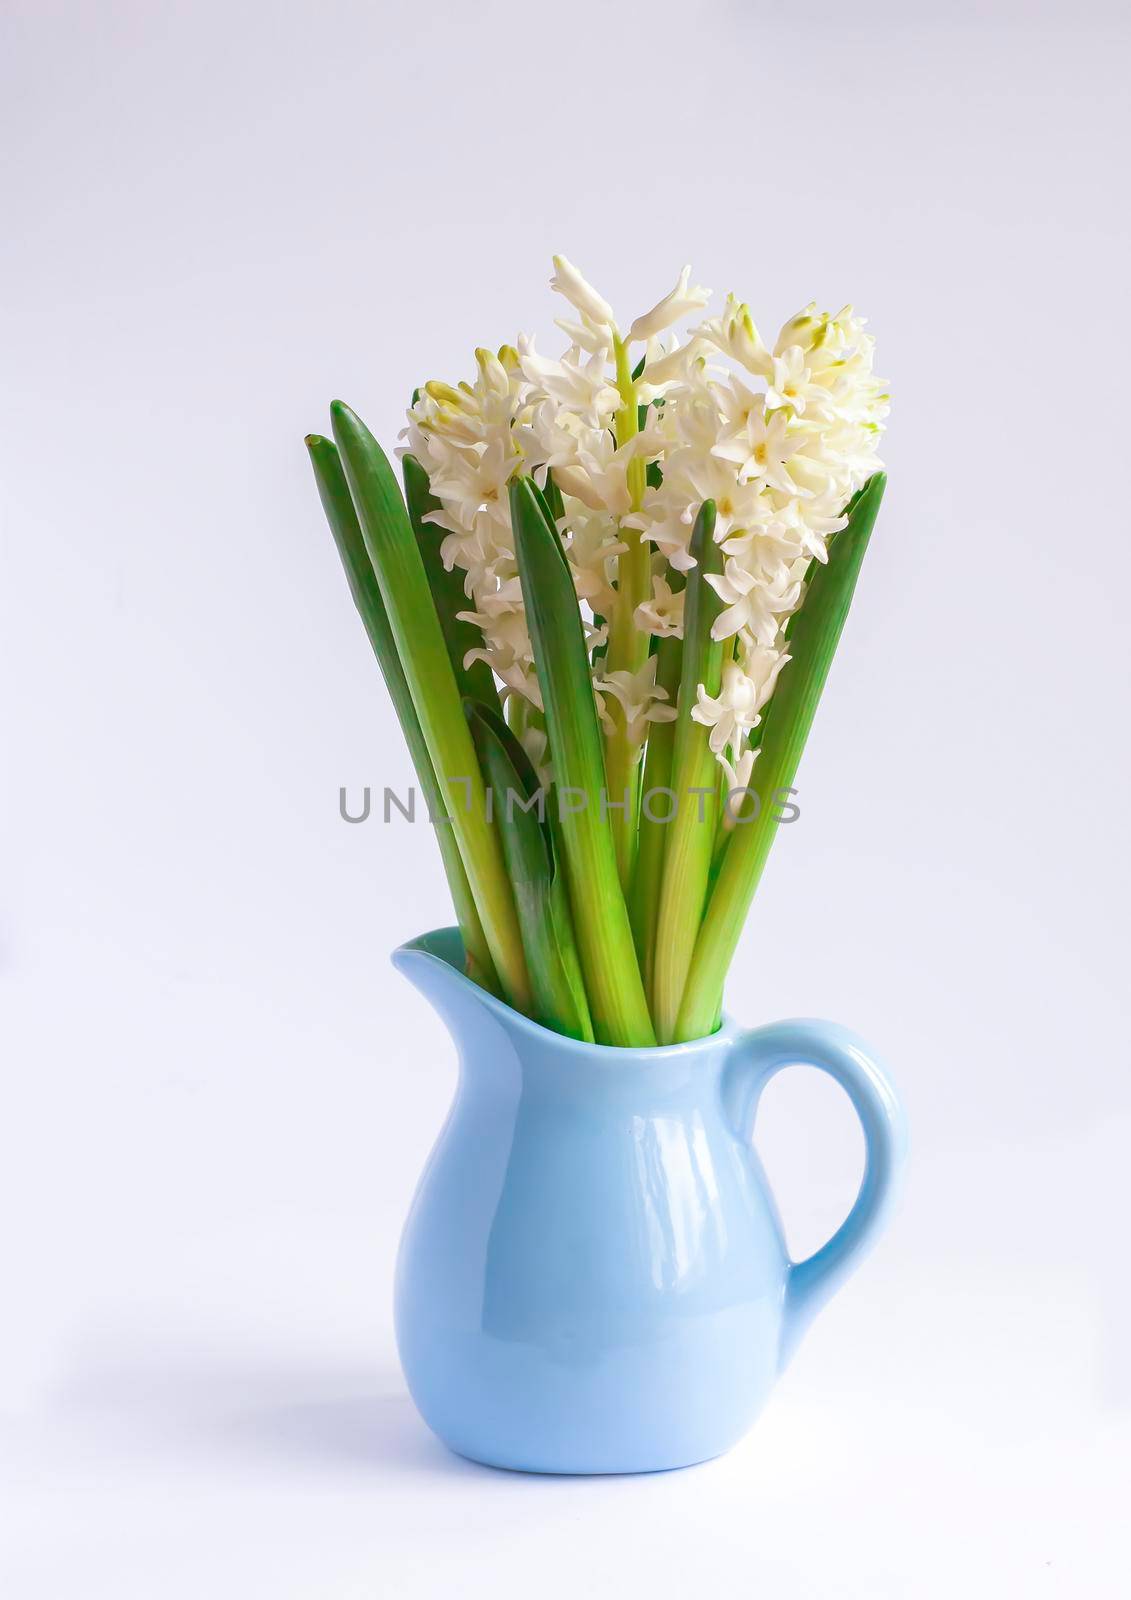 Spring white hyacinth flowers in a blue ceramics vase blooming at springtime.